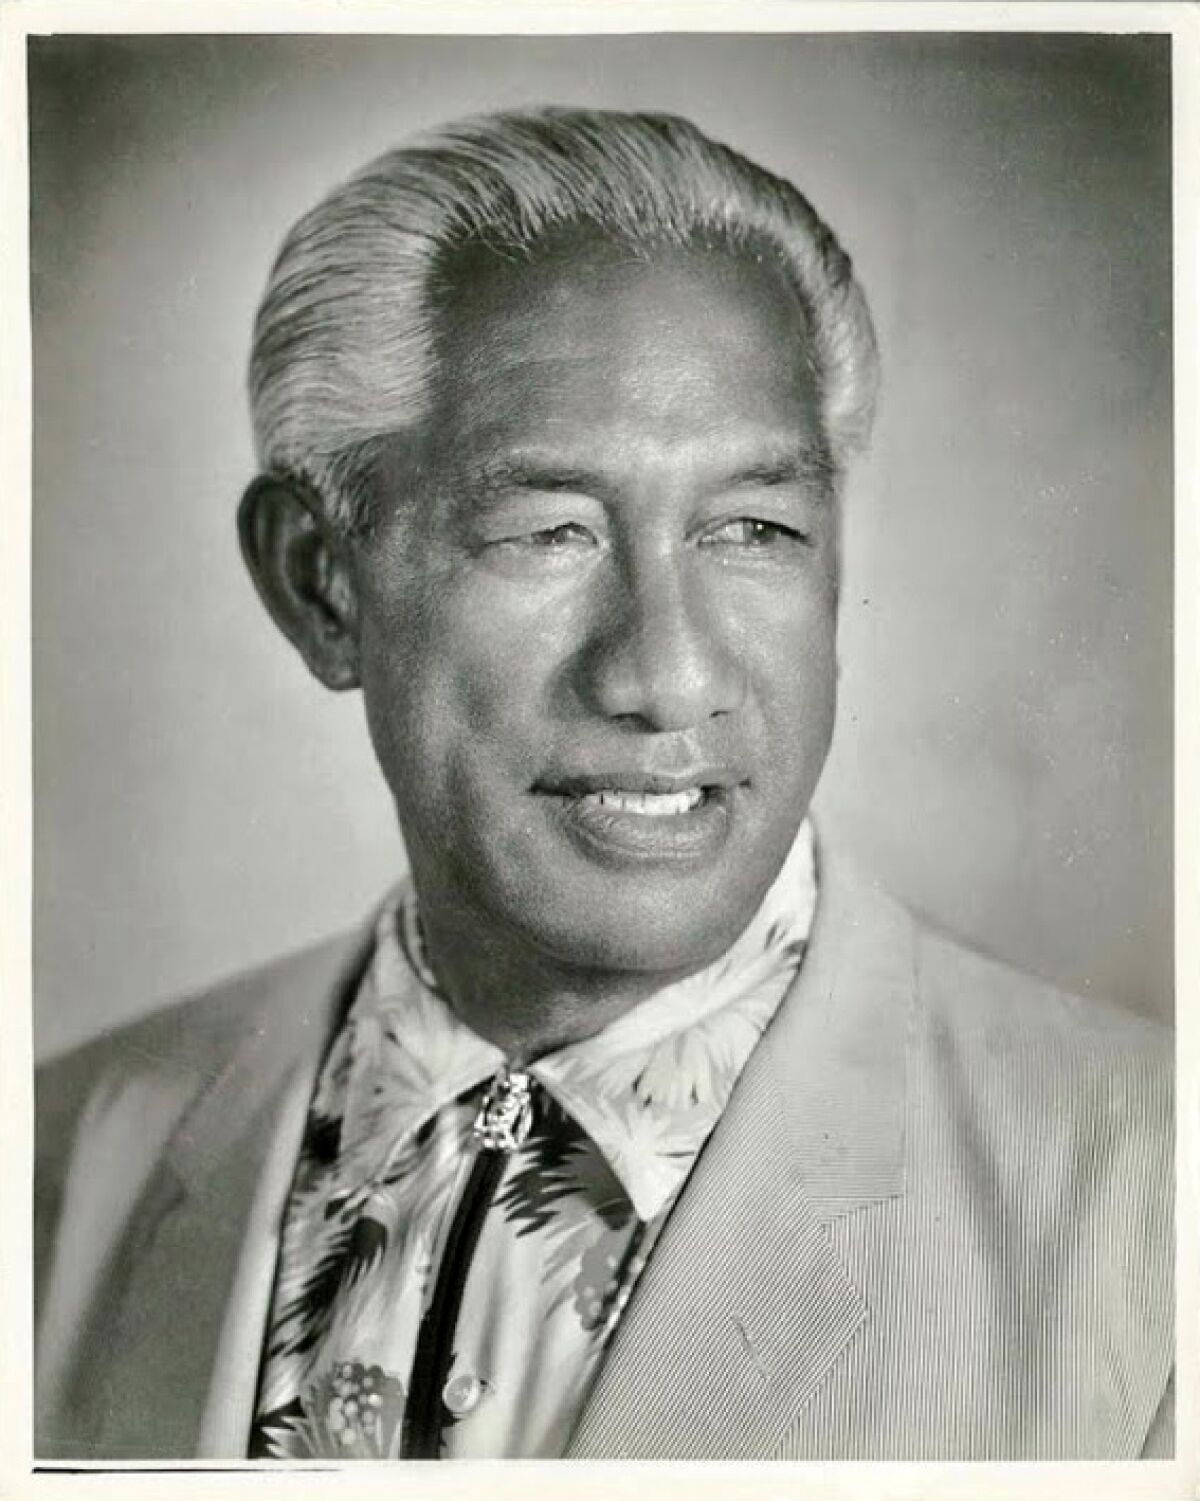 Duke Kahanamoku, considered the father of modern surfing, was honorary chair of the 1966 world championships in Ocean Beach.